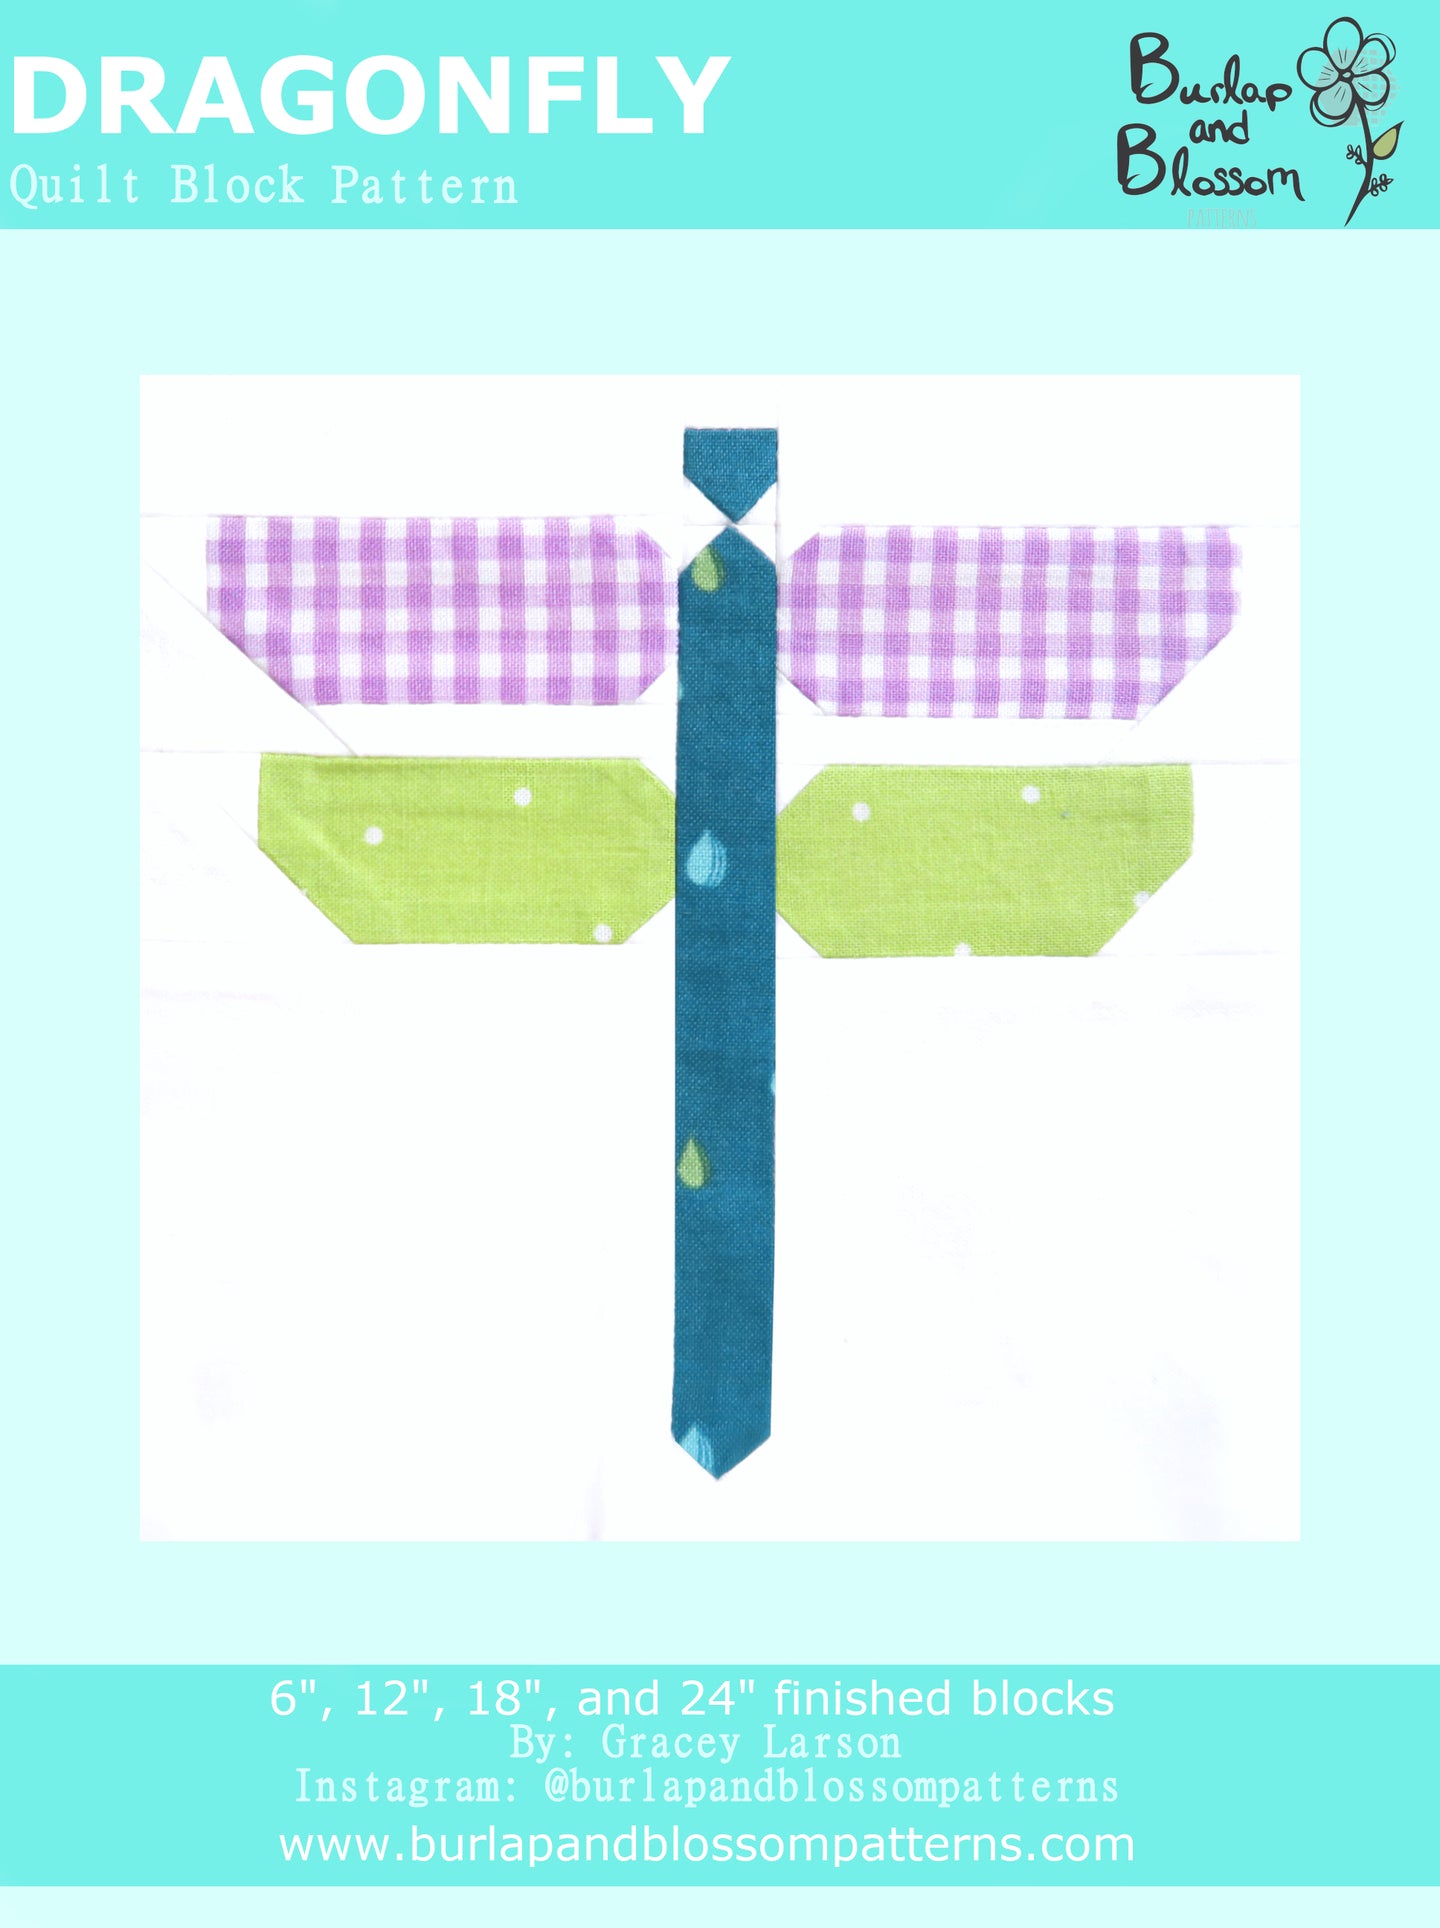 Pattern, Dragonfly Quilt Block by Burlap and Blossom (digital download)